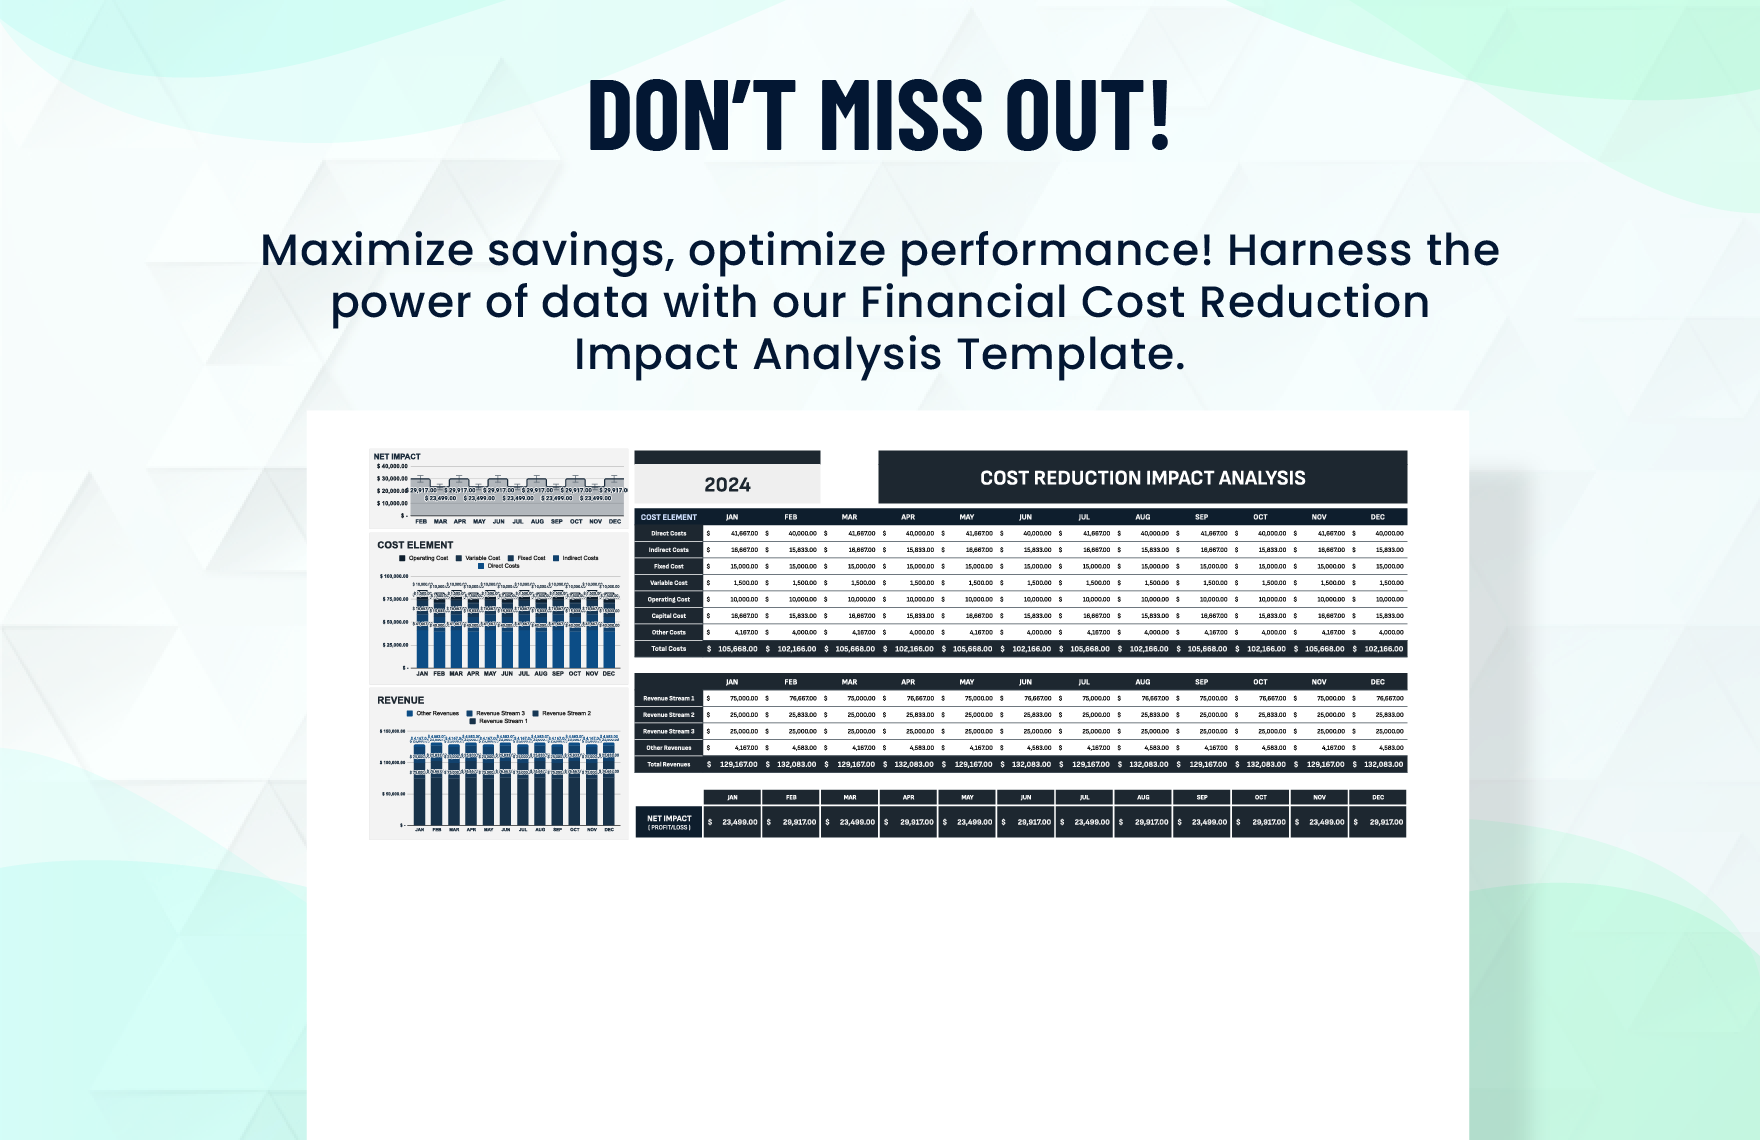 Financial Cost Reduction Impact Analysis Template